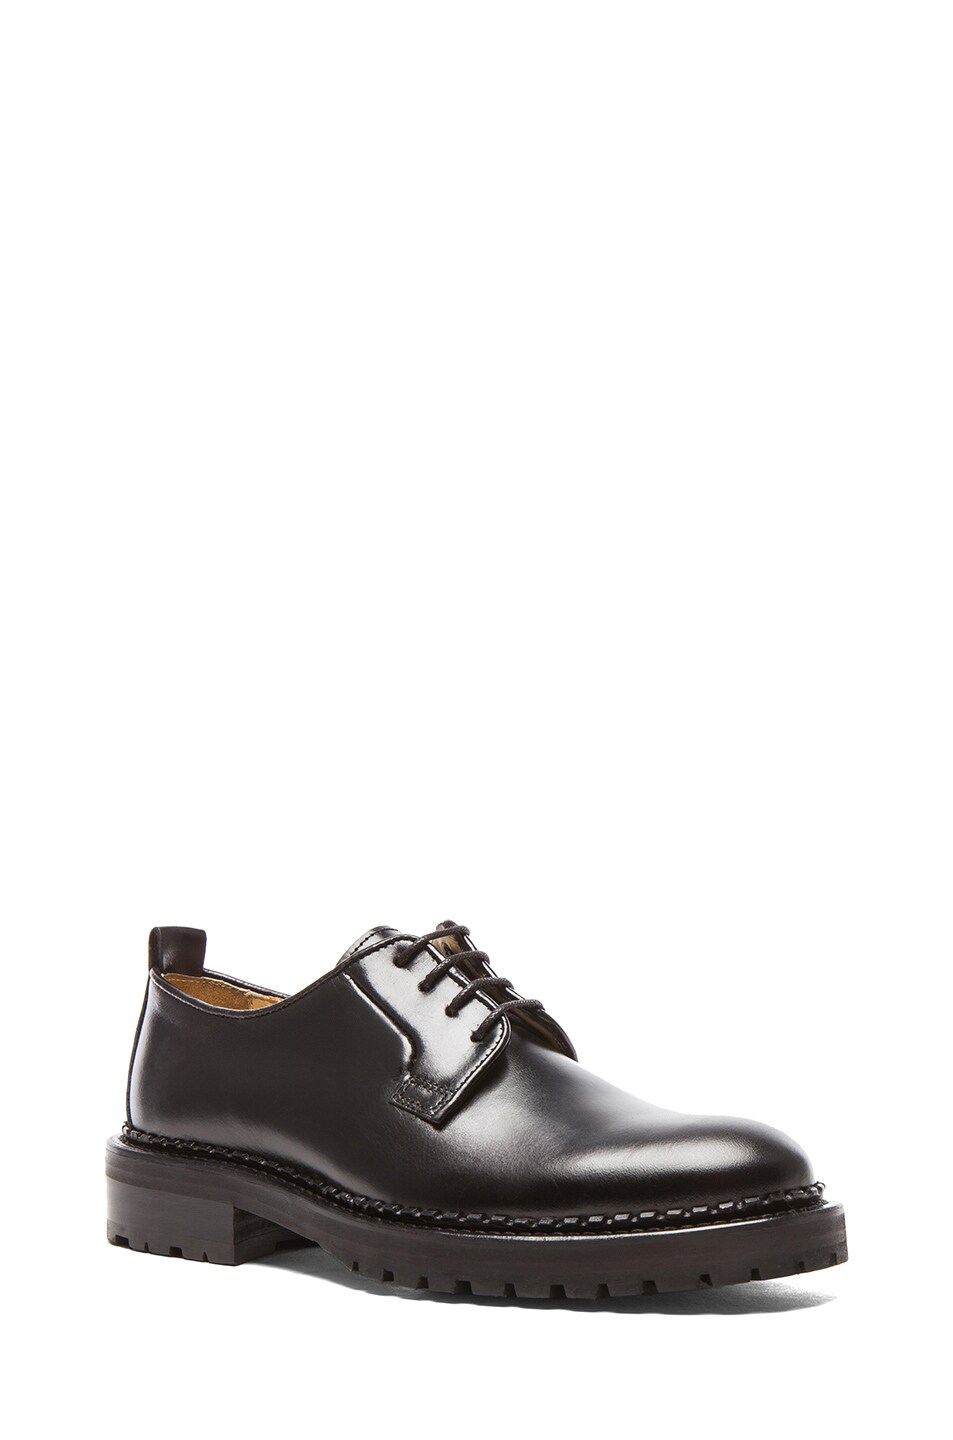 Carven Lug Sole Leather Dress Shoes in Black | FWRD